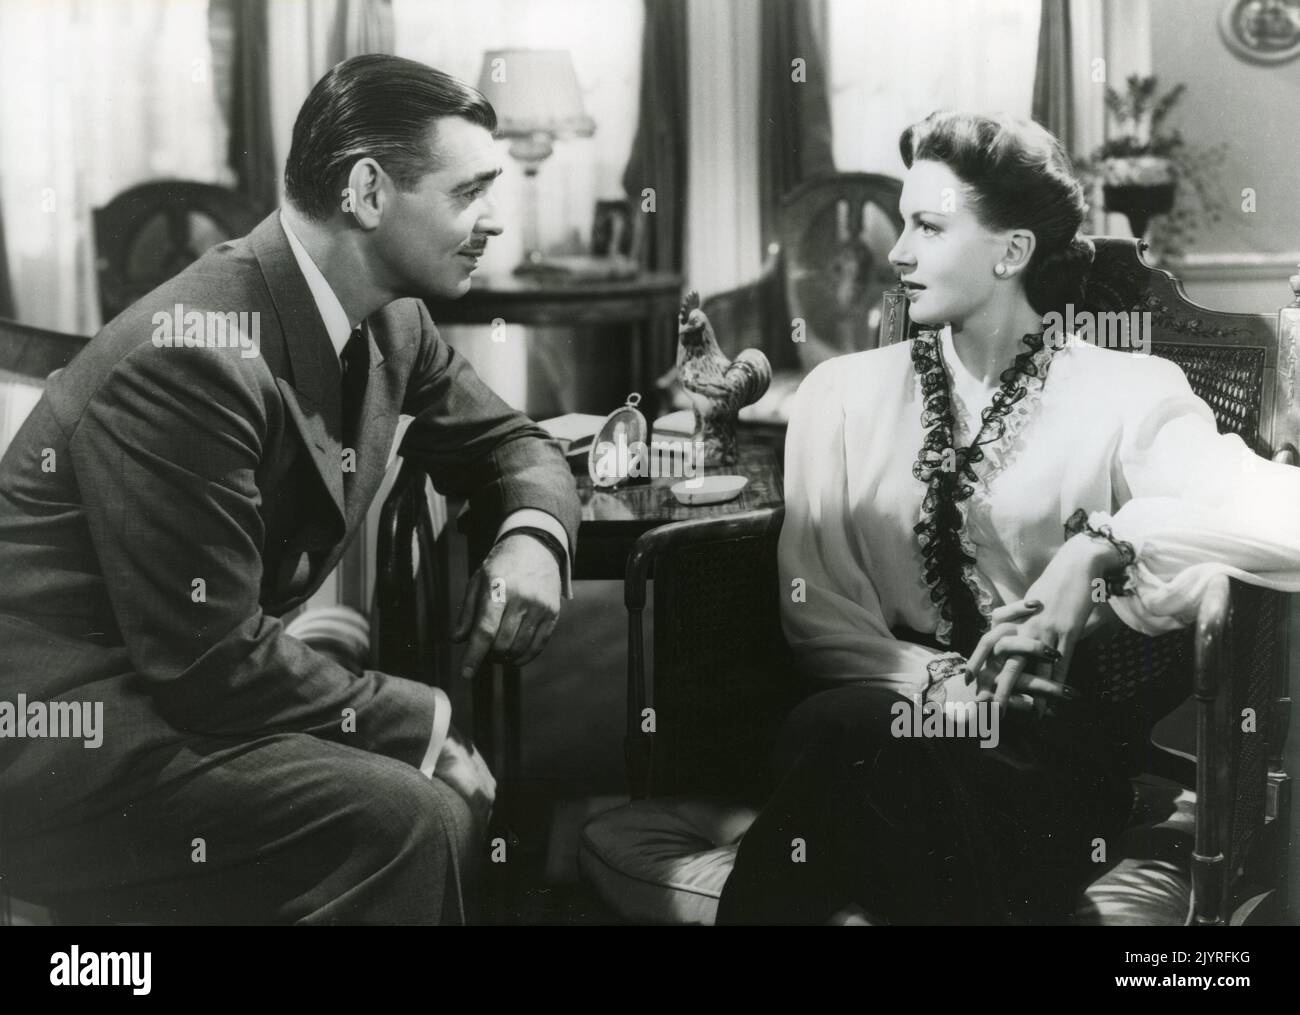 American actor Clark Gable and actress Deborah Kerr in the movie The Hucksters, USA 1947 Stock Photo